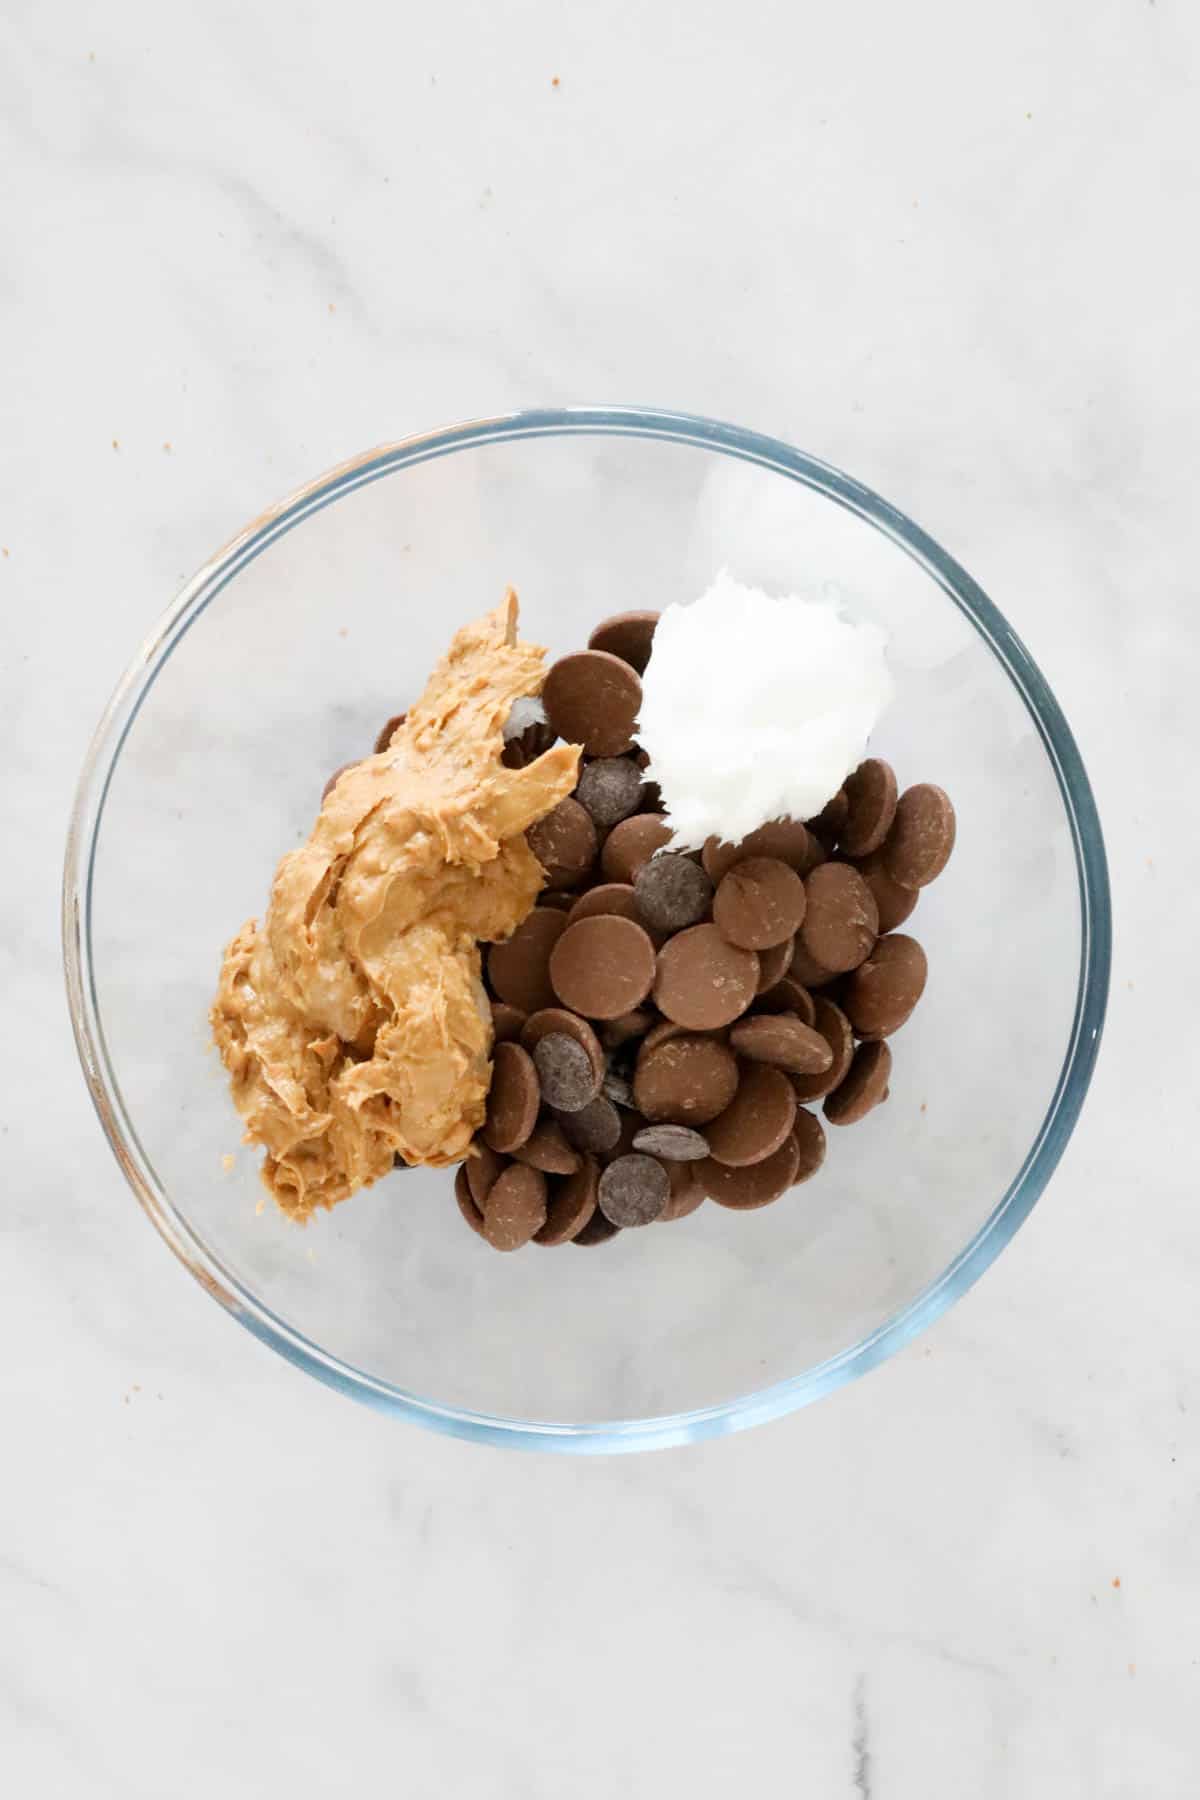 Chocolate, peanut butter and coconut oil in a glass bowl.